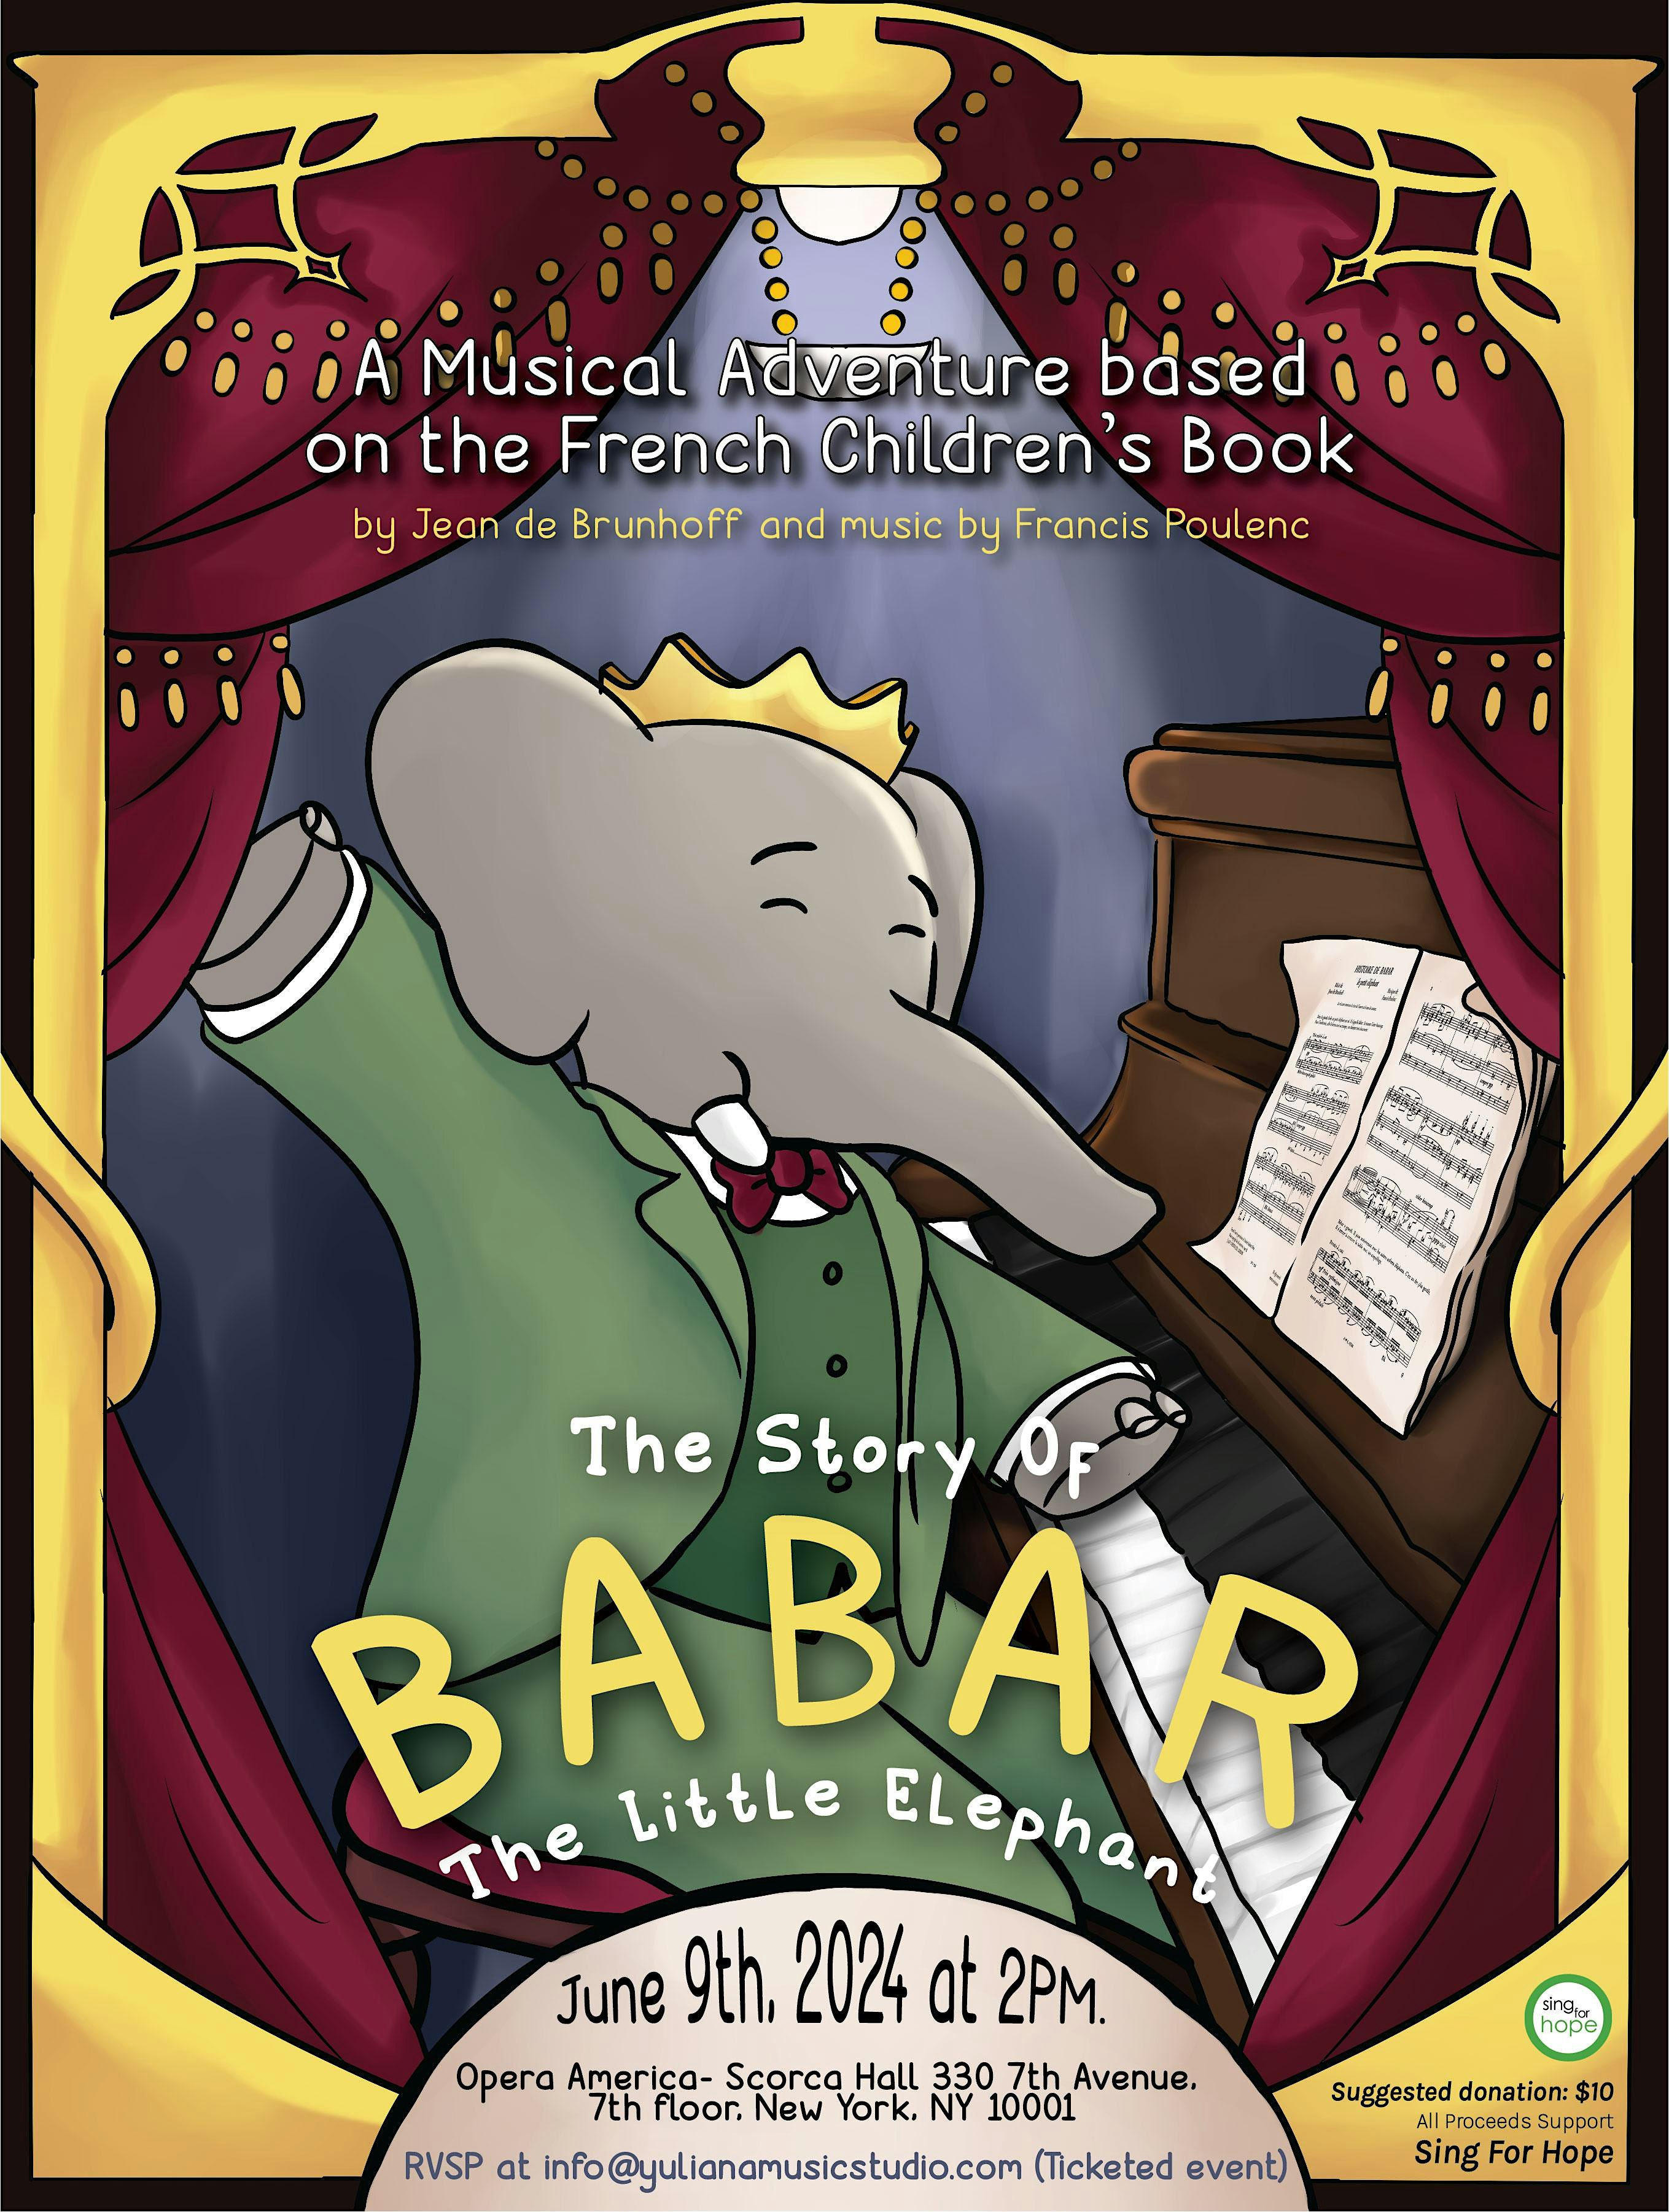 Babar the Elephant Goes to NYC